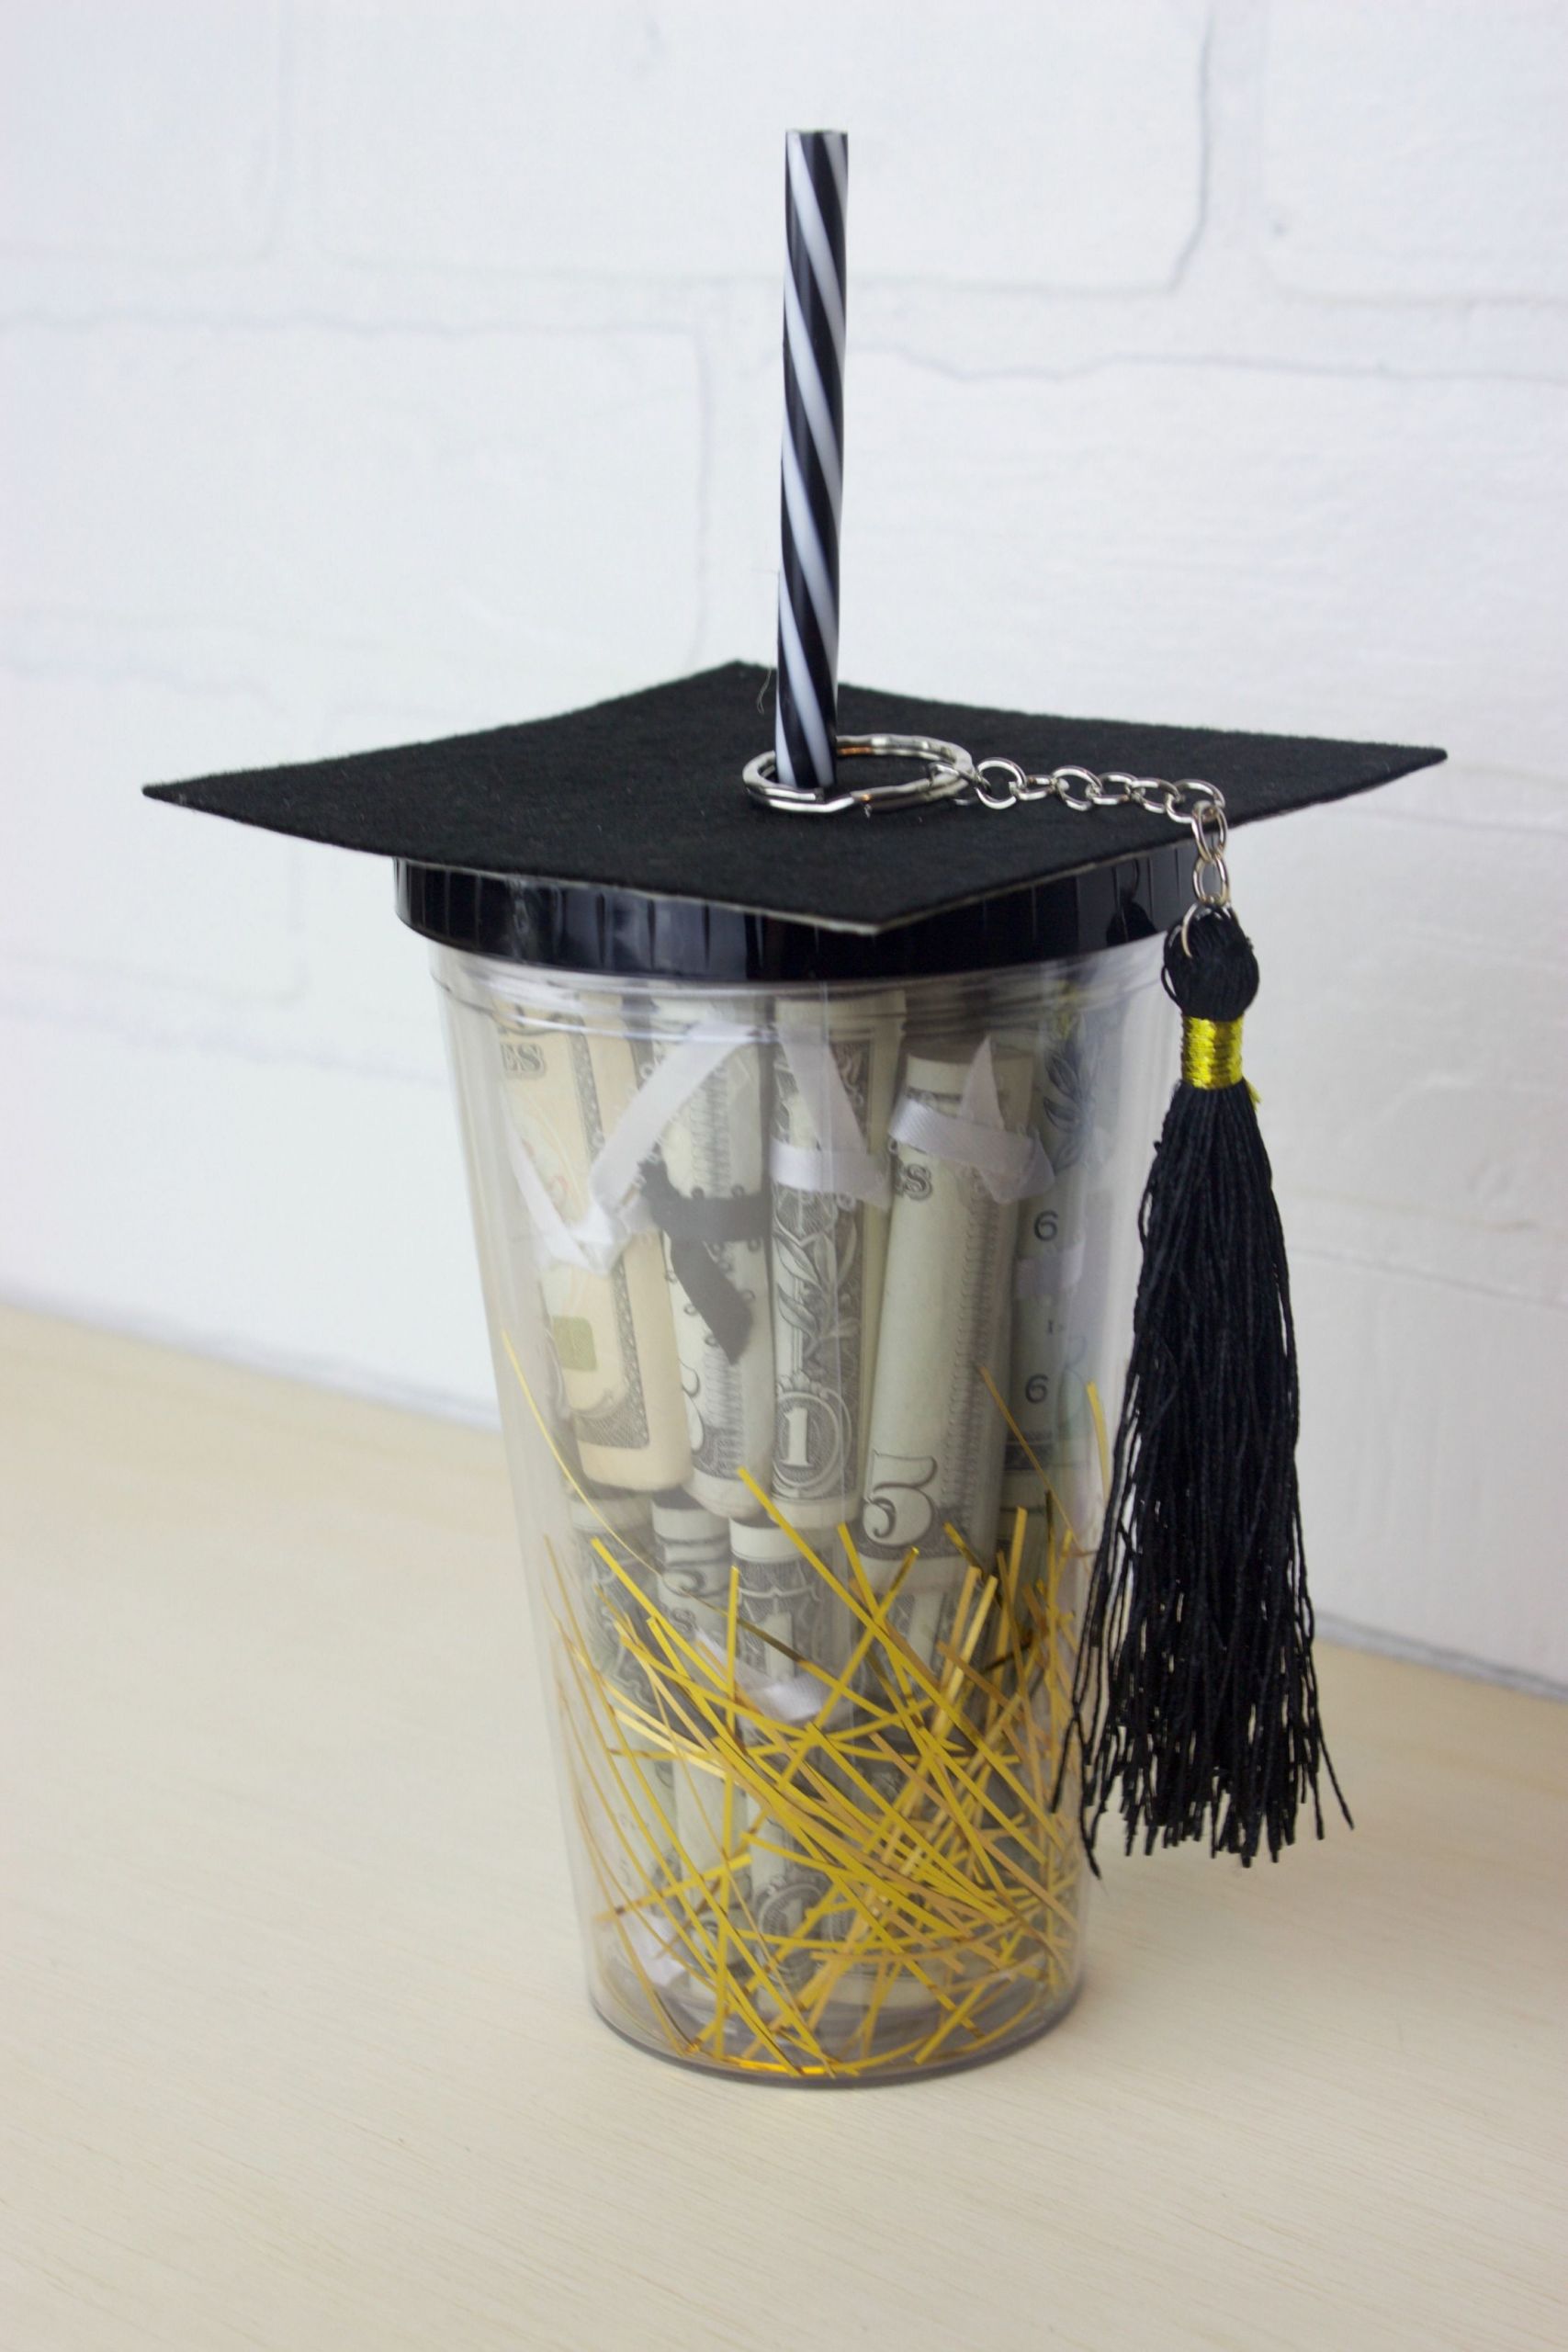 Elementary Graduation Gift Ideas For Her
 DIY Graduation Gift in a Cup